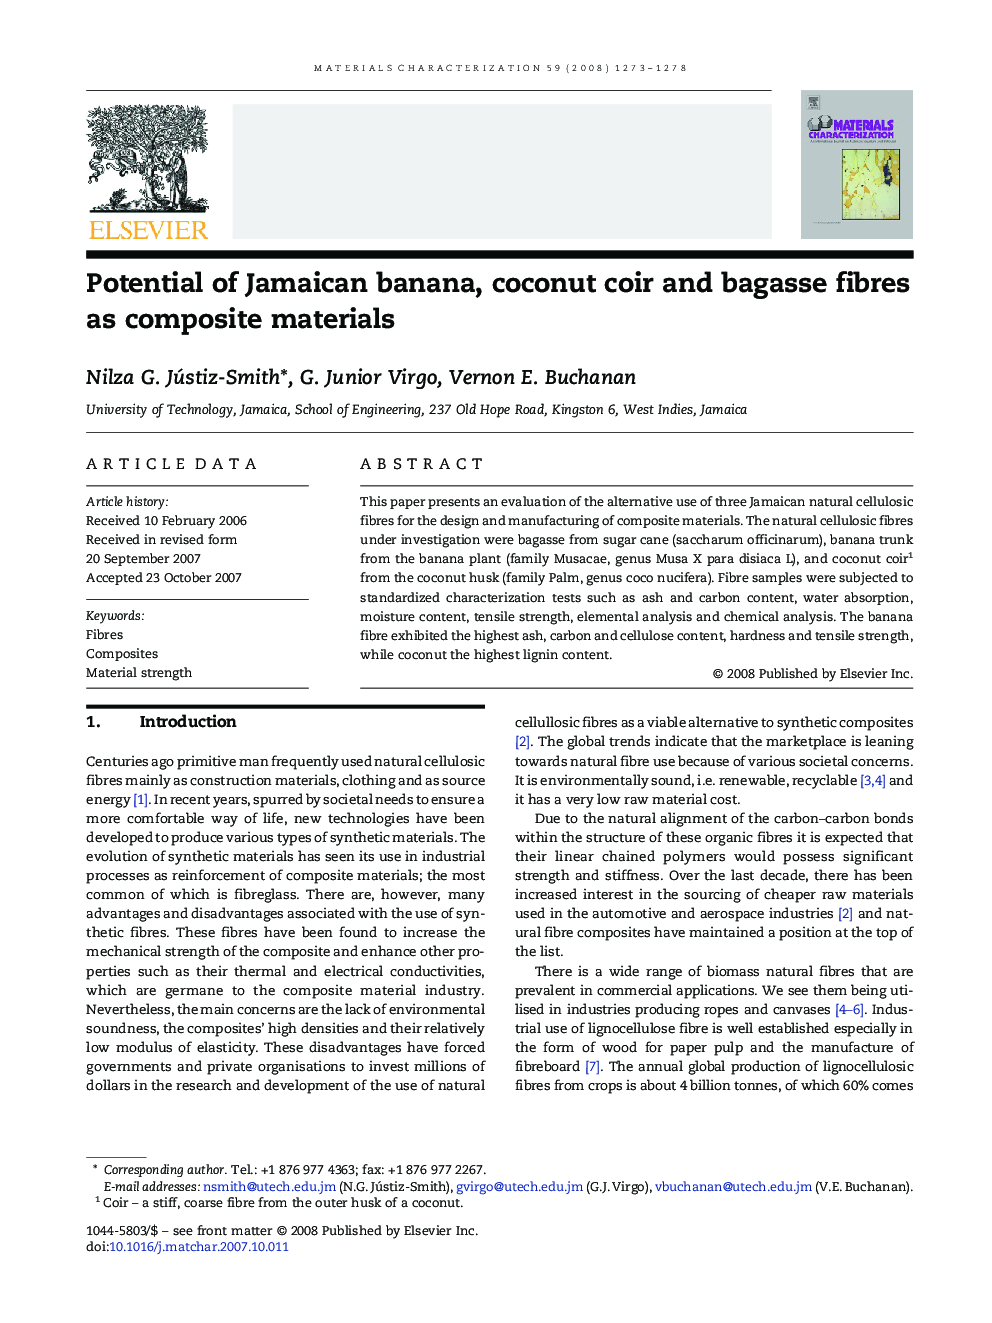 Potential of Jamaican banana, coconut coir and bagasse fibres as composite materials